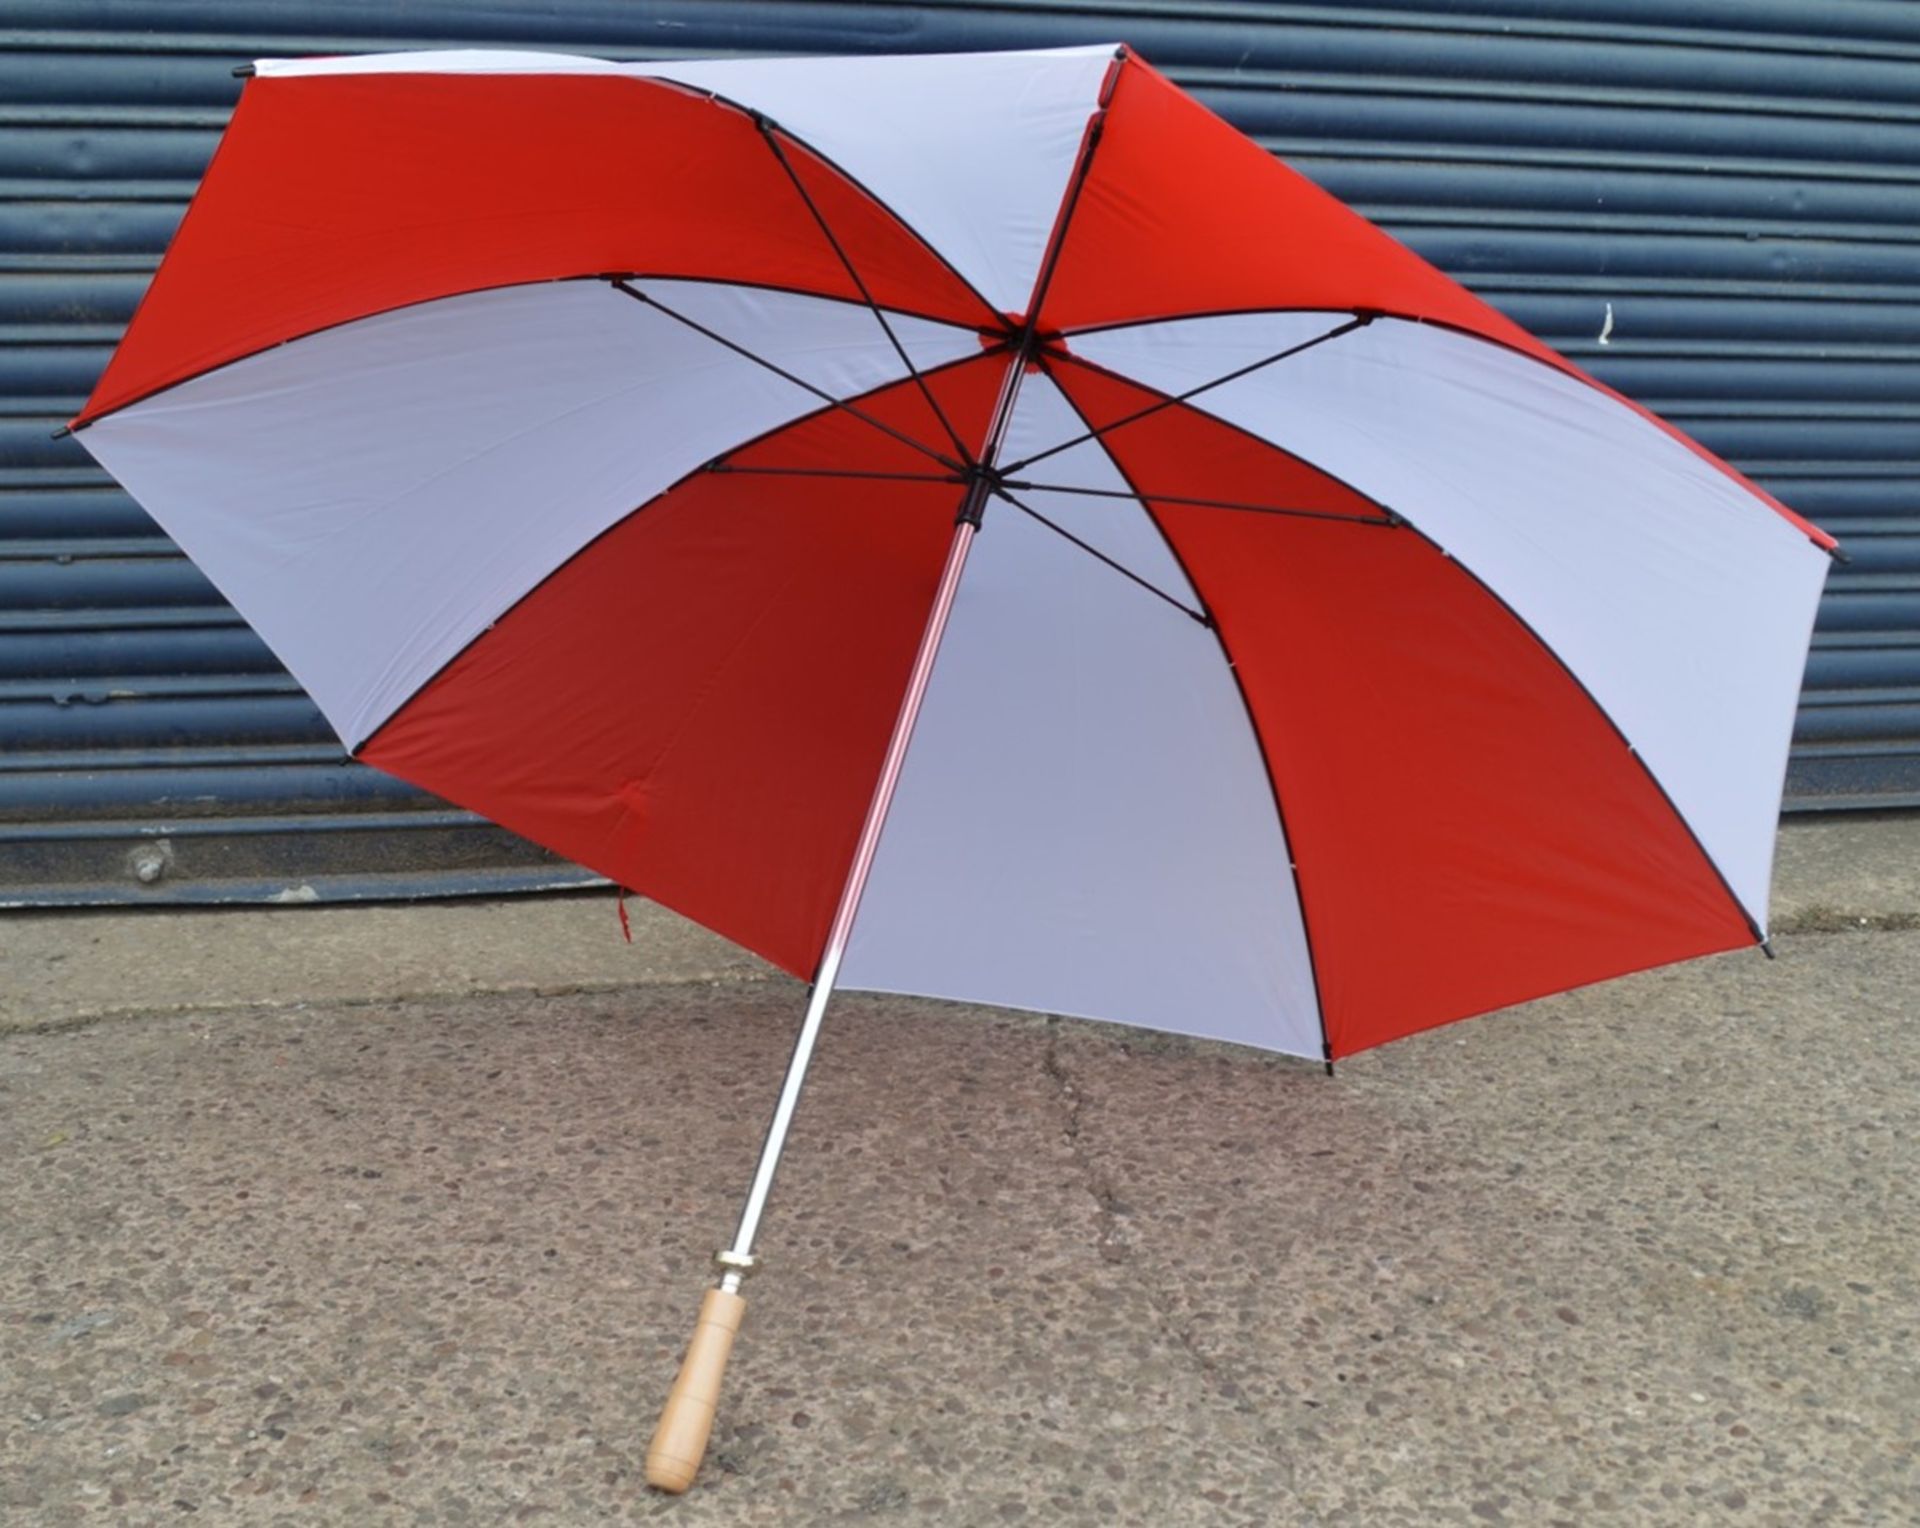 24 x Proline Golf Umbrellas - Colour: Red And White - Brand New Sealed Stock - Dimensions: Length - Image 3 of 5